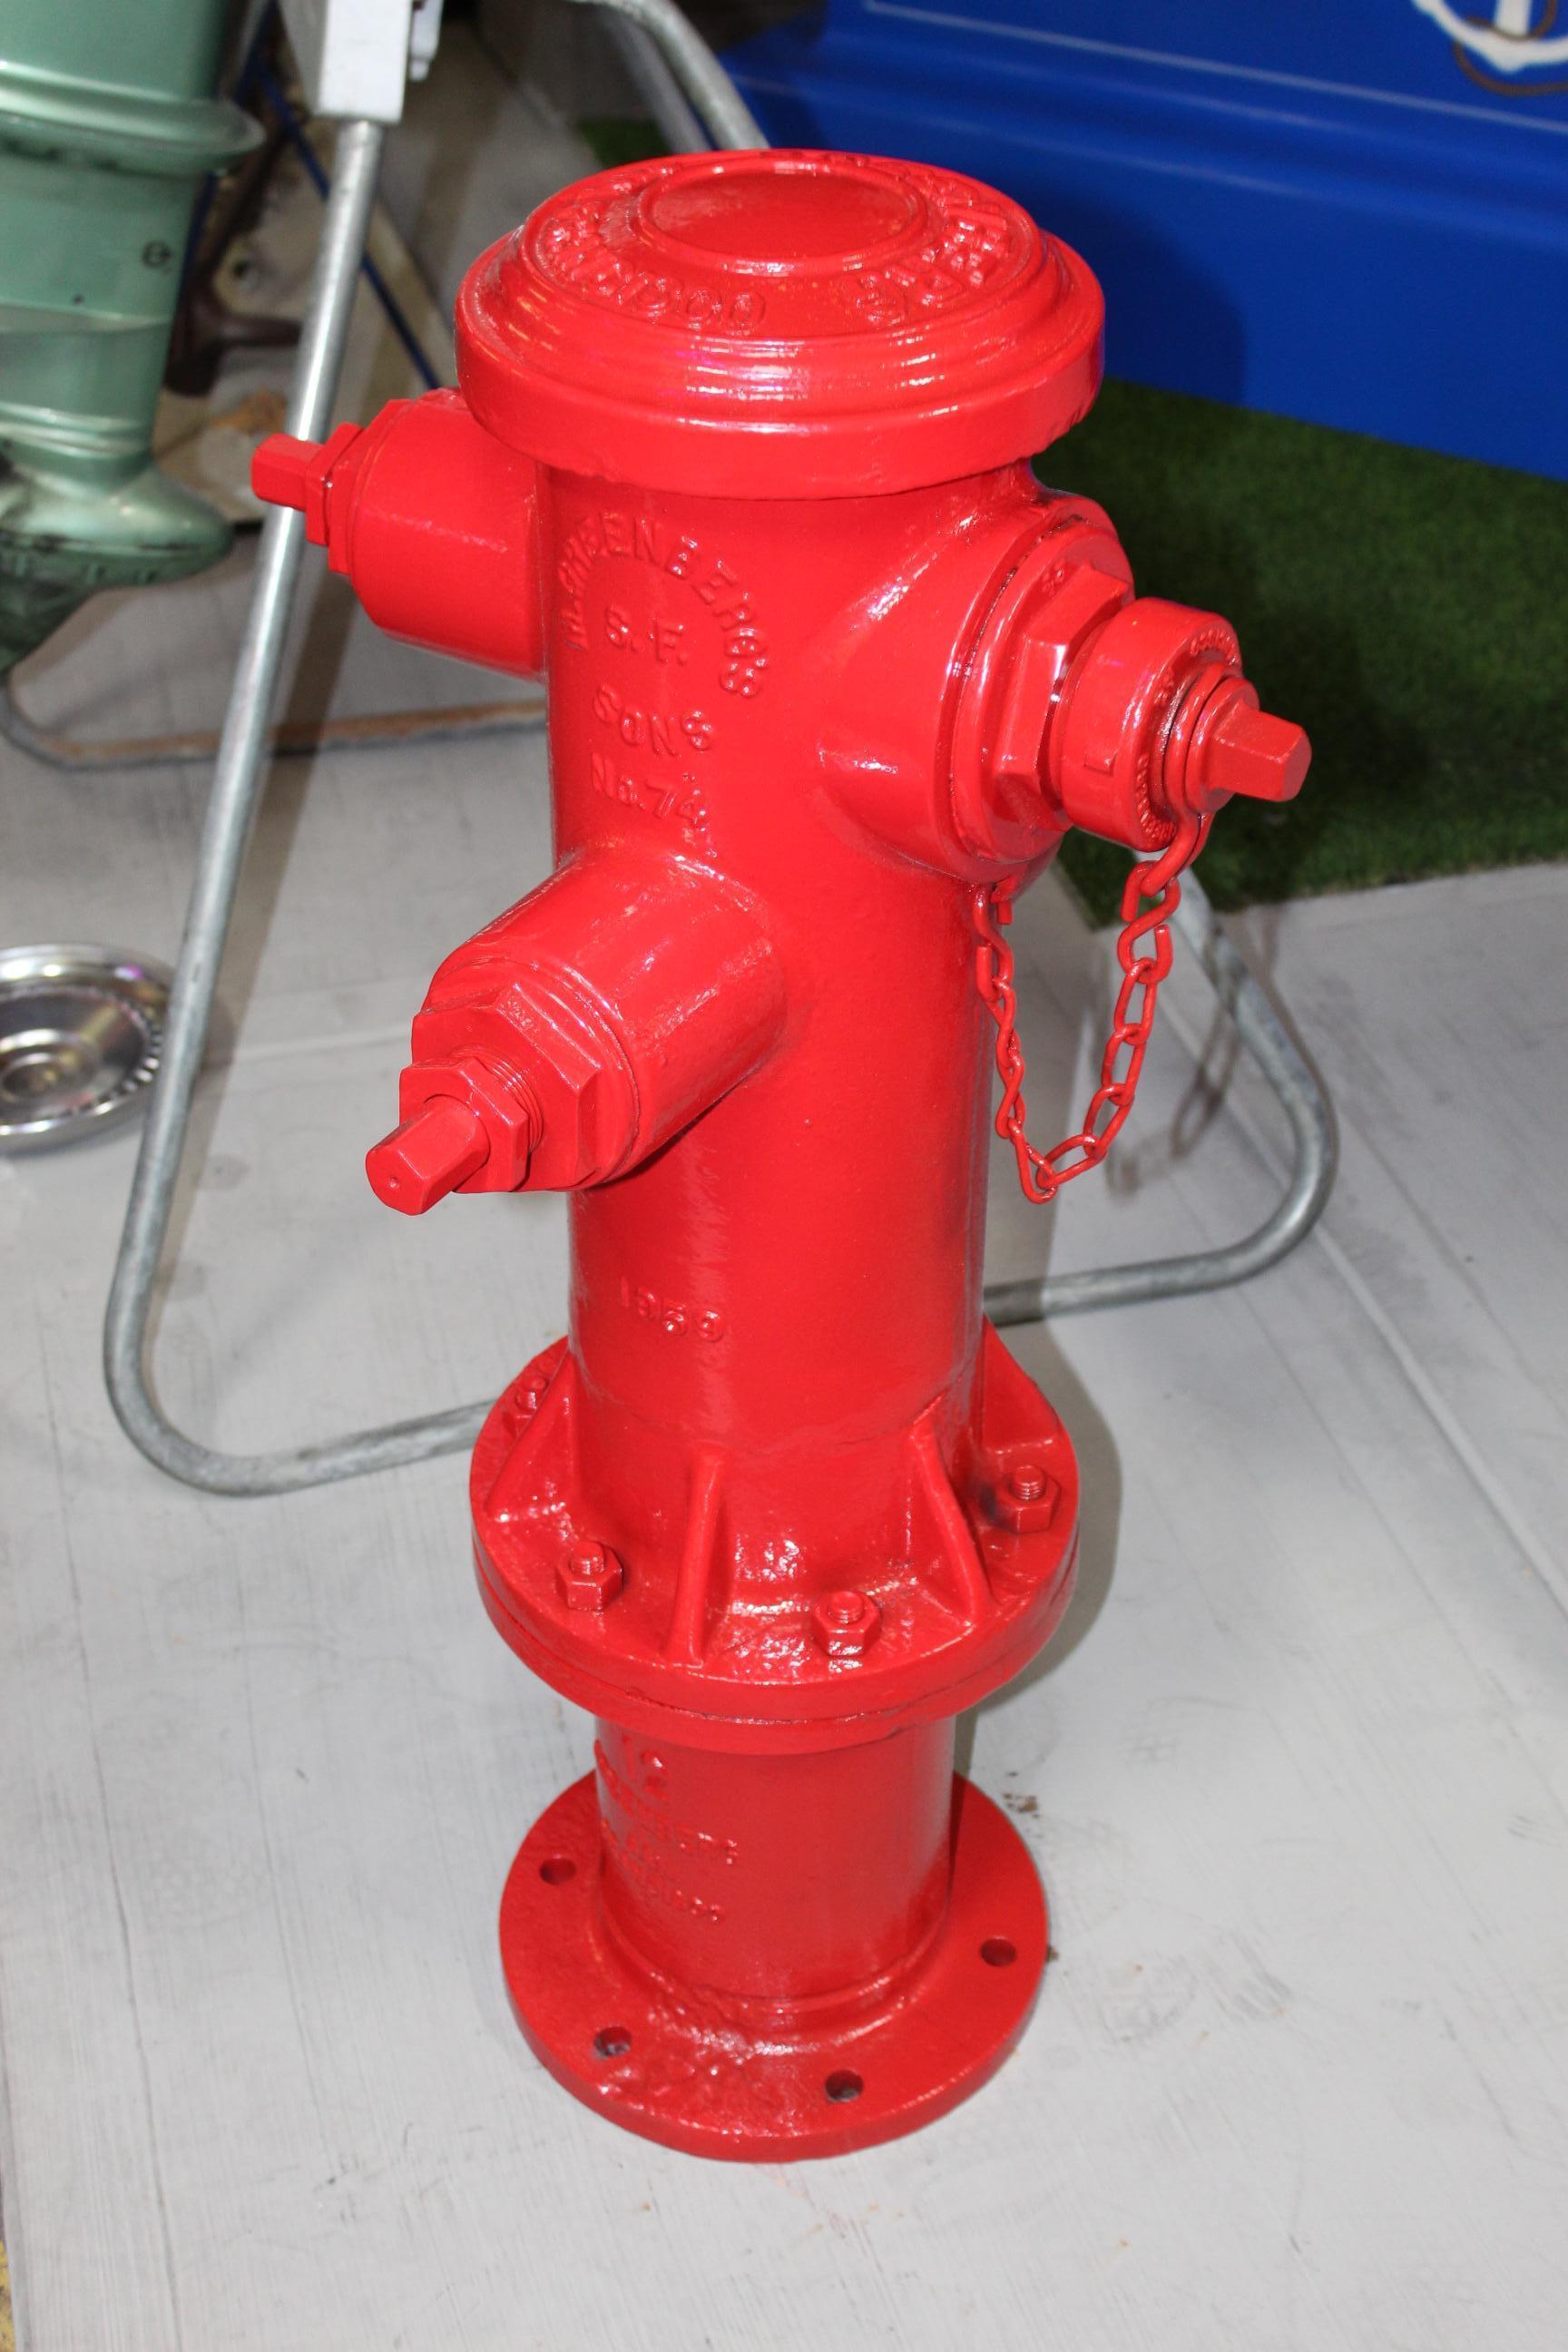 Heavy cast iron fire Hydrant that has been repainted in fire engine red. This is model 74 manufactured in San Francisco.